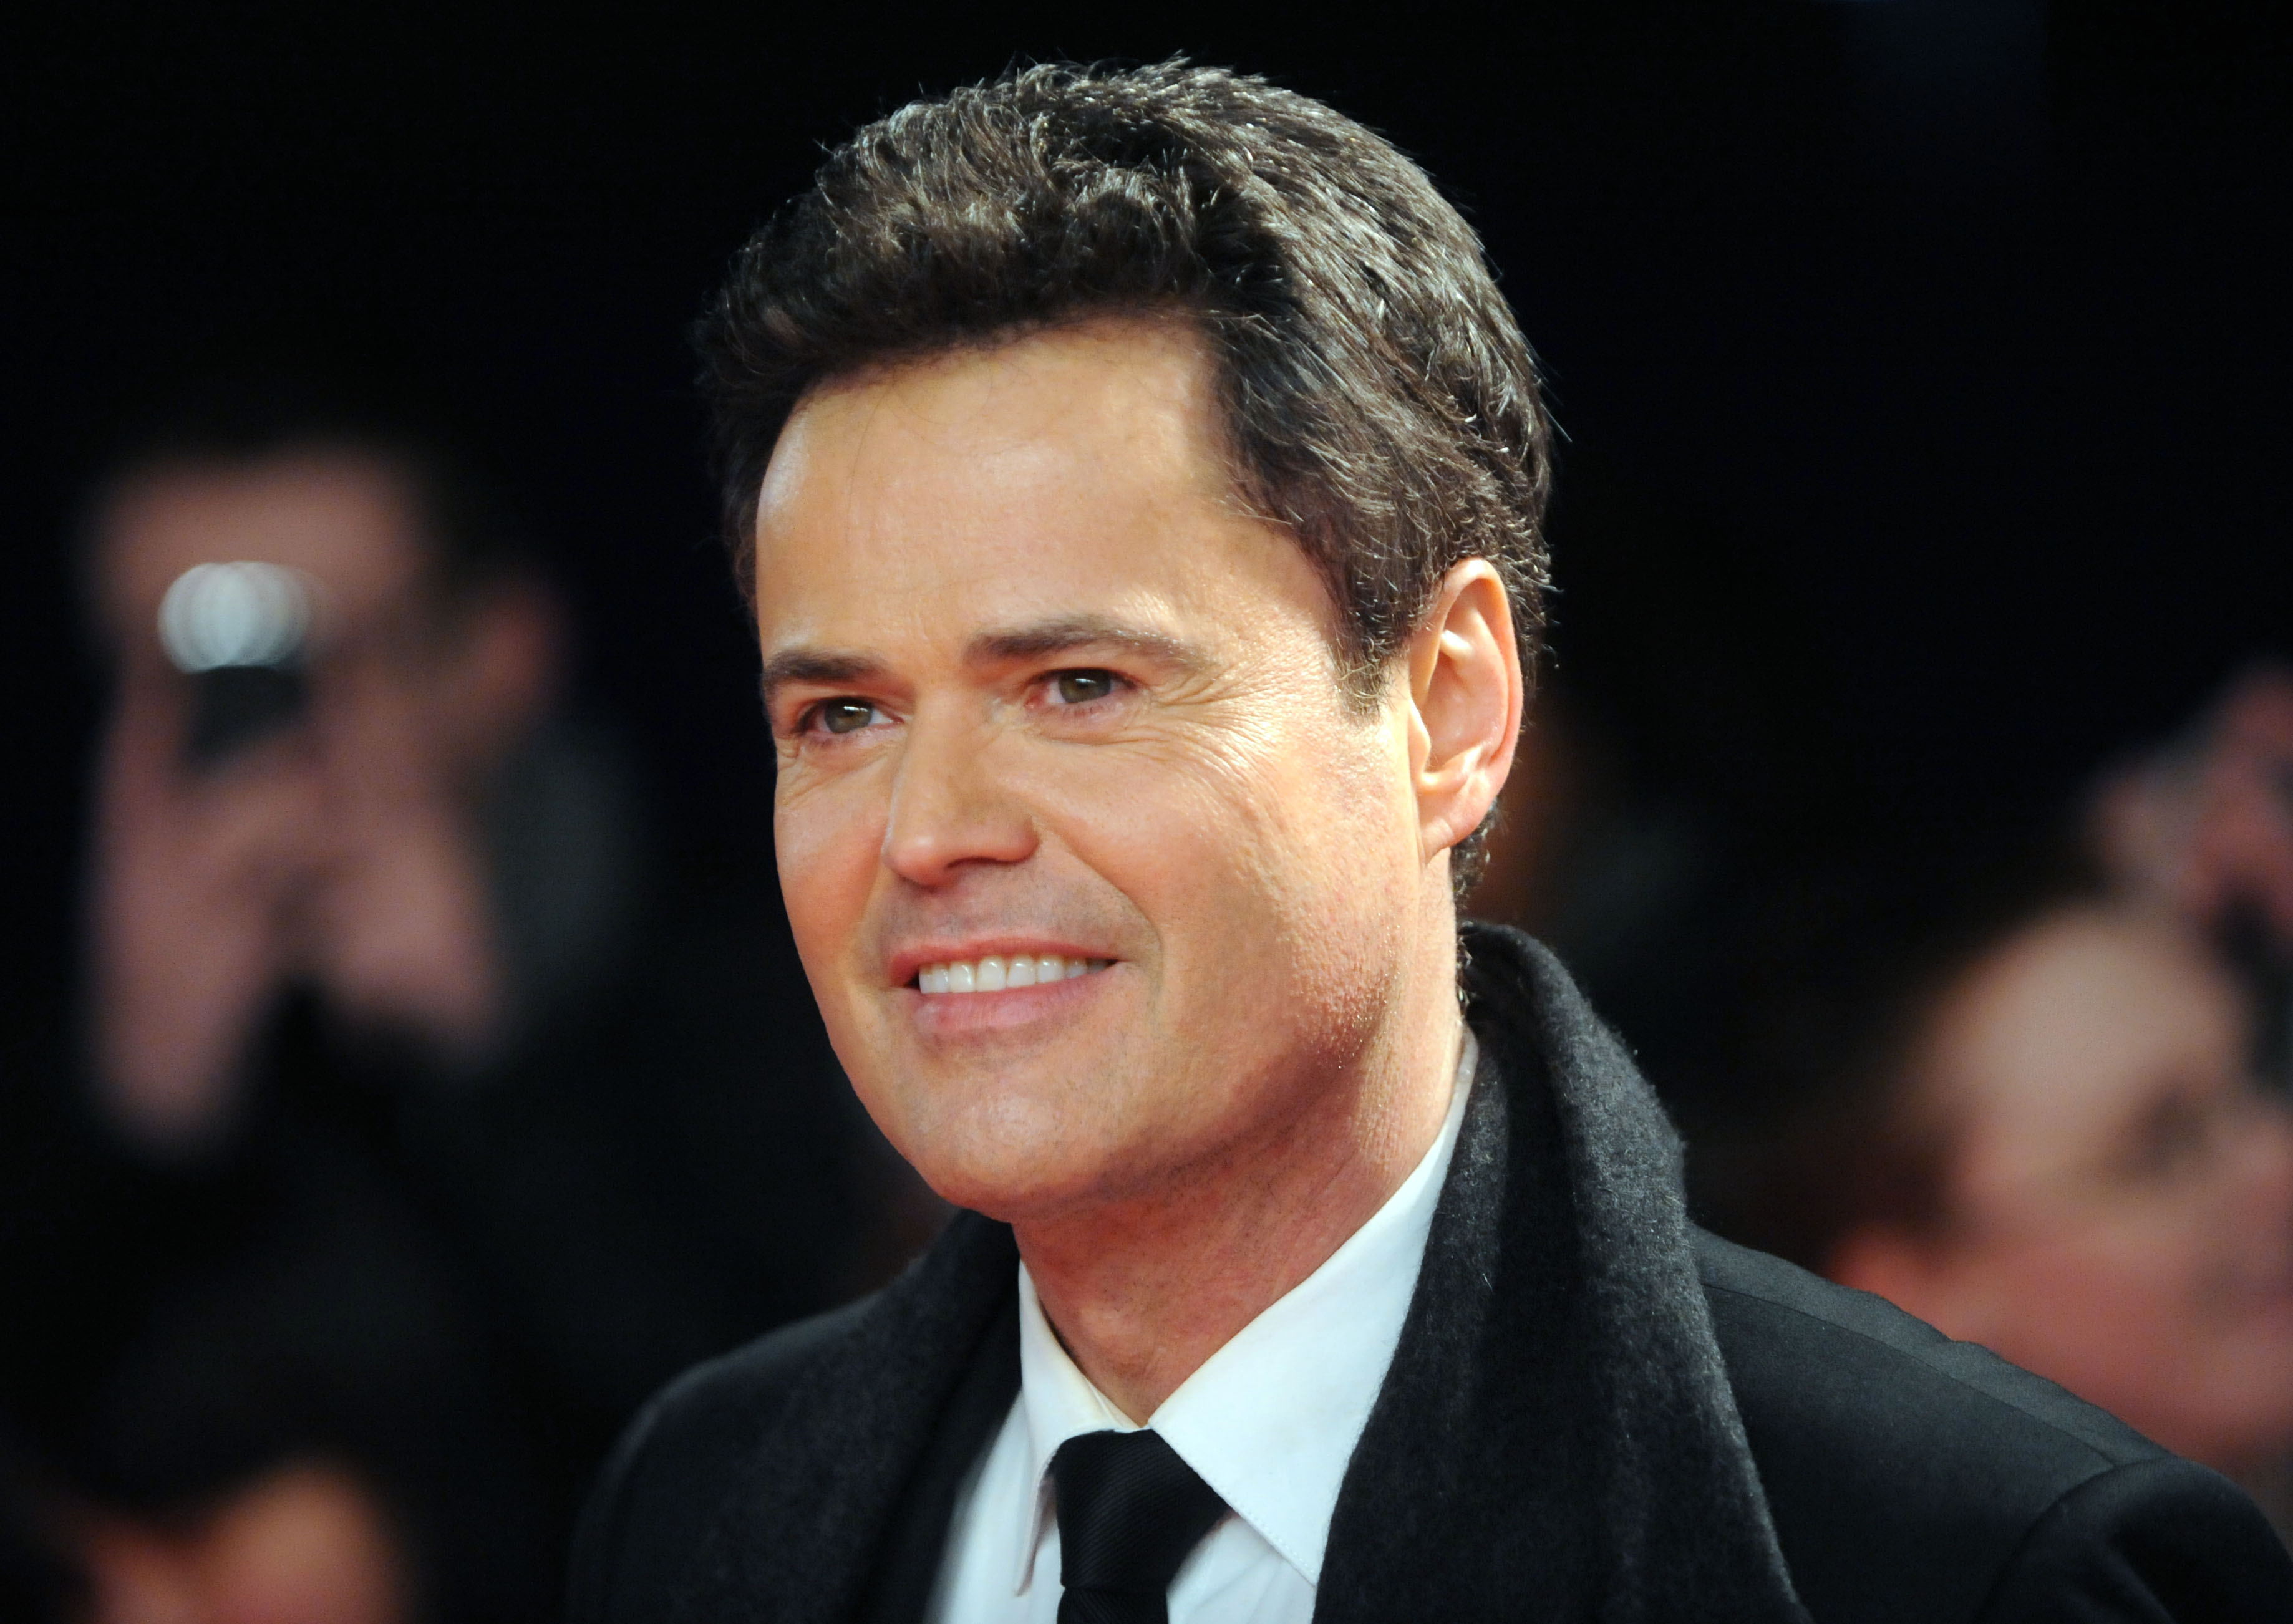 Donny Osmond in London, England on January 23, 2013 | Source: Getty Images 